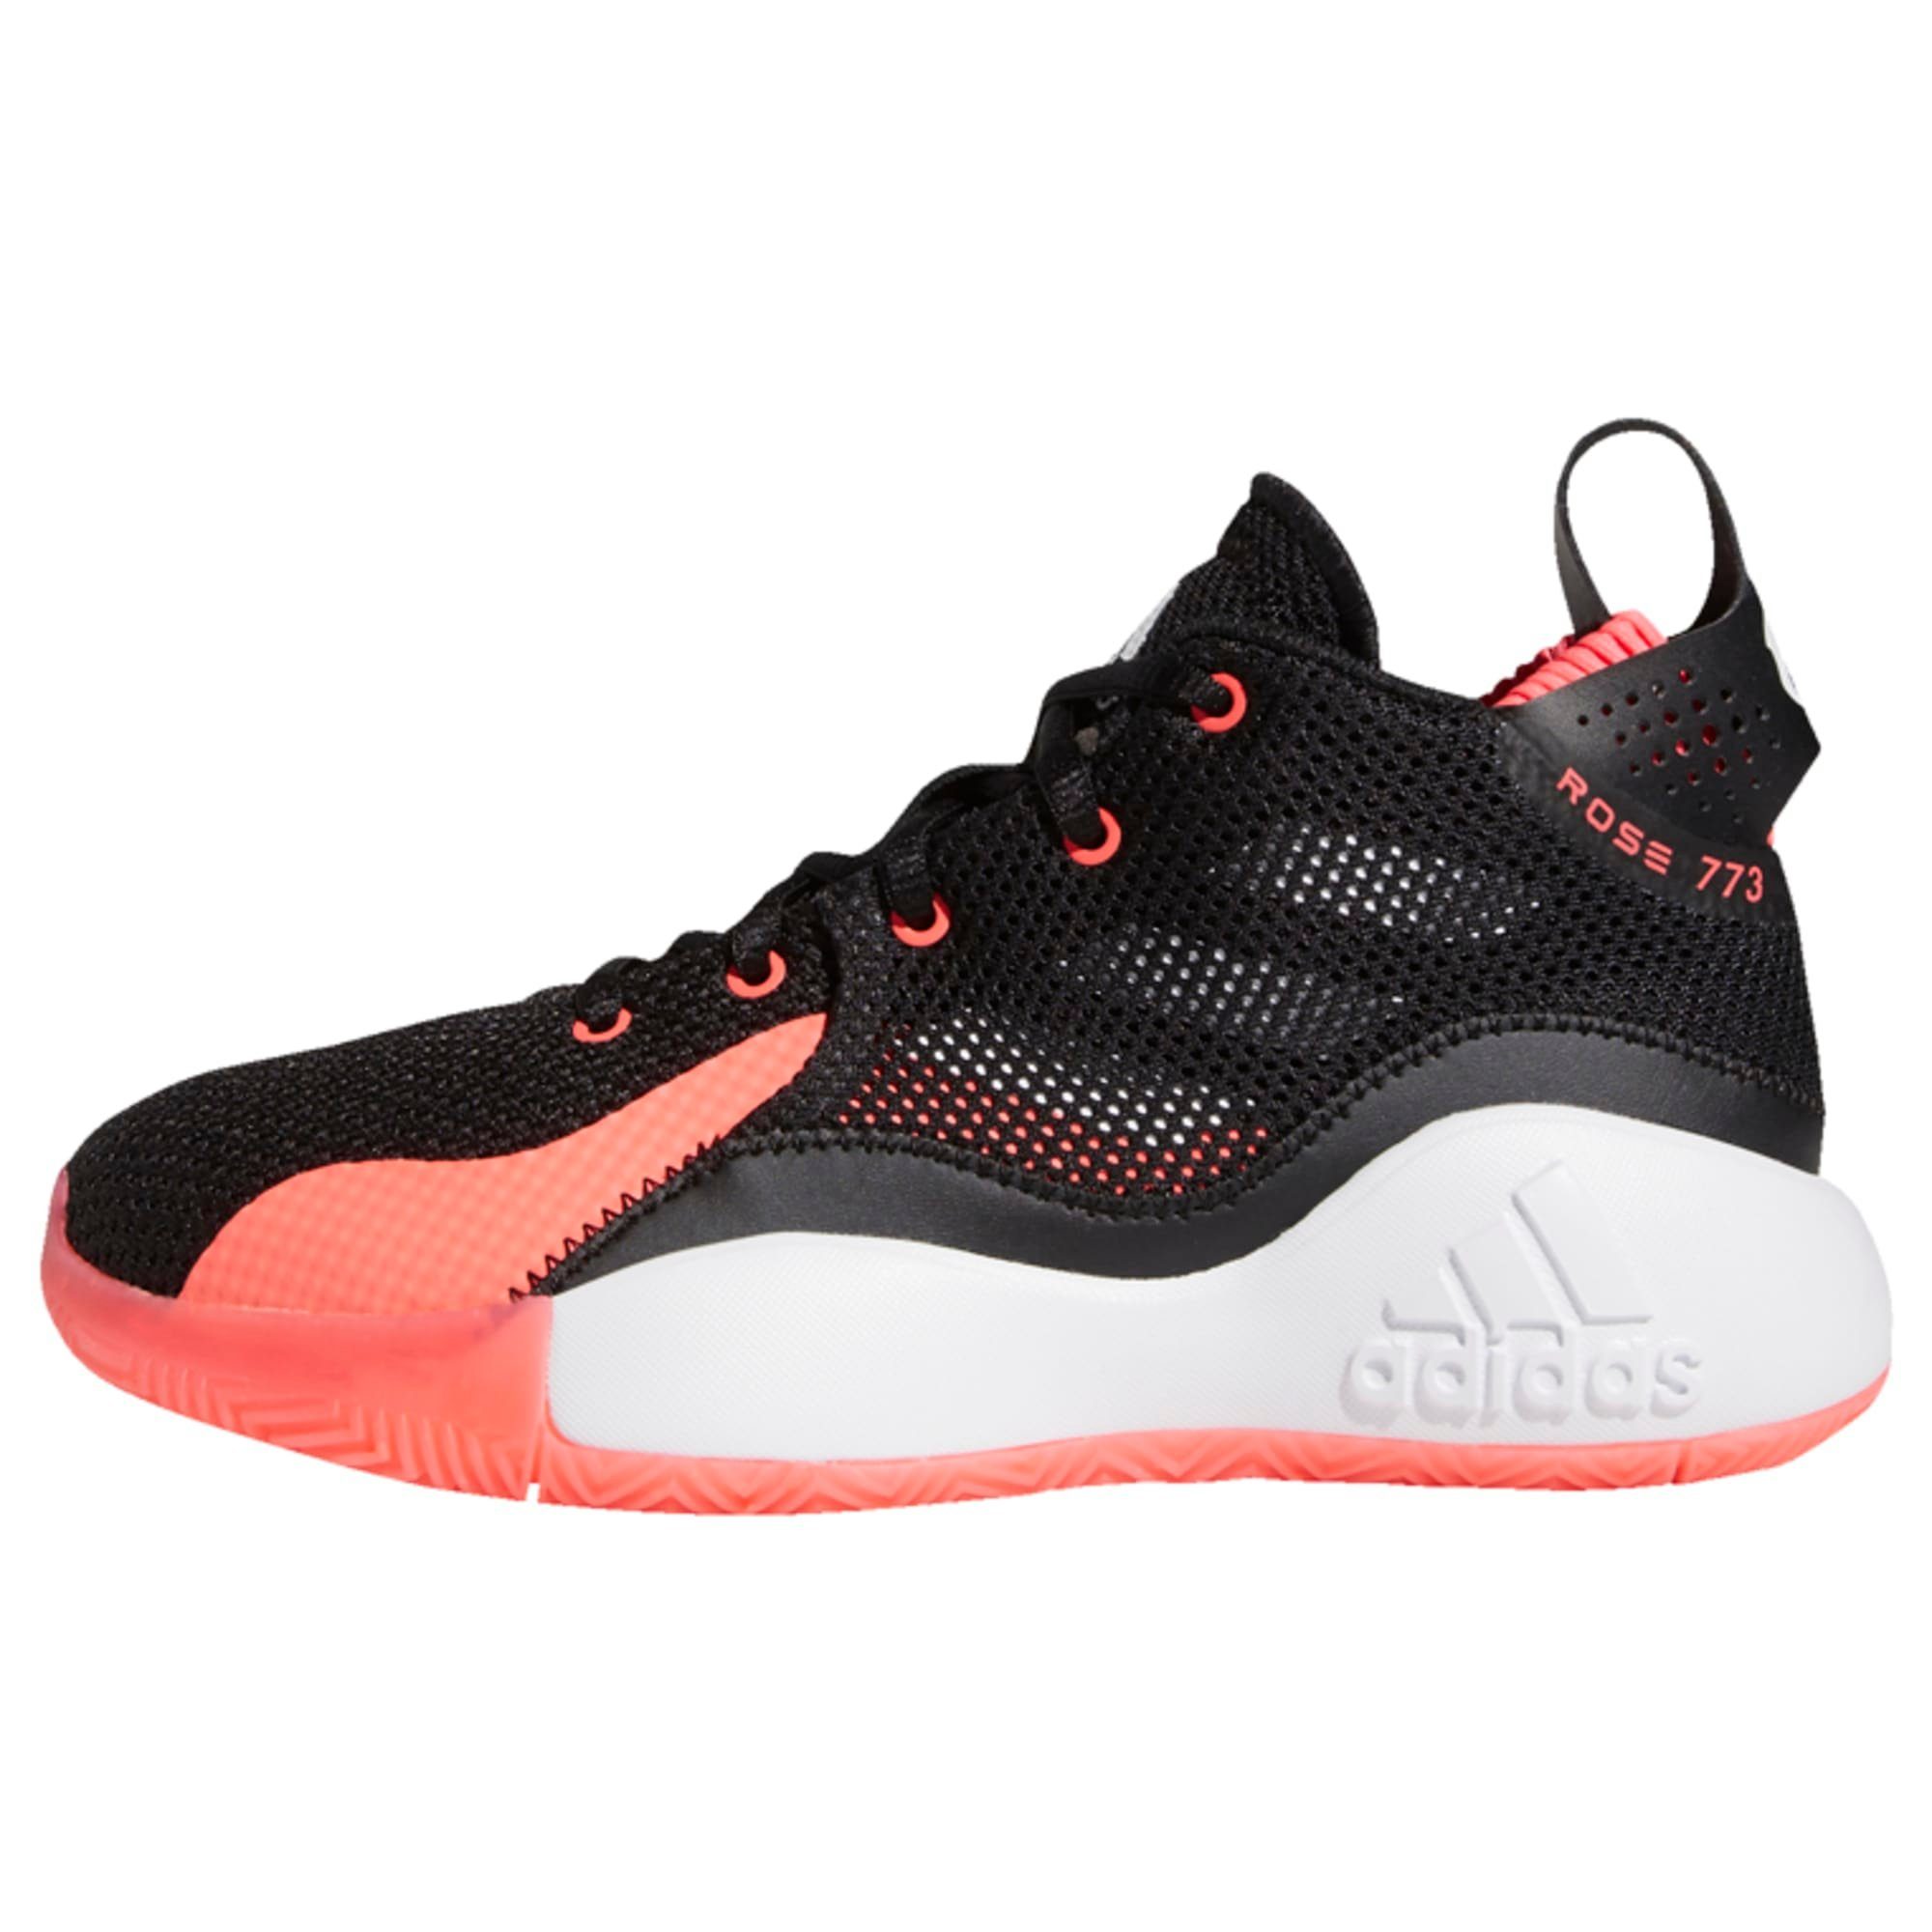 adidas Performance »D Rose 773 2020 Schuh« Sneaker | OTTO